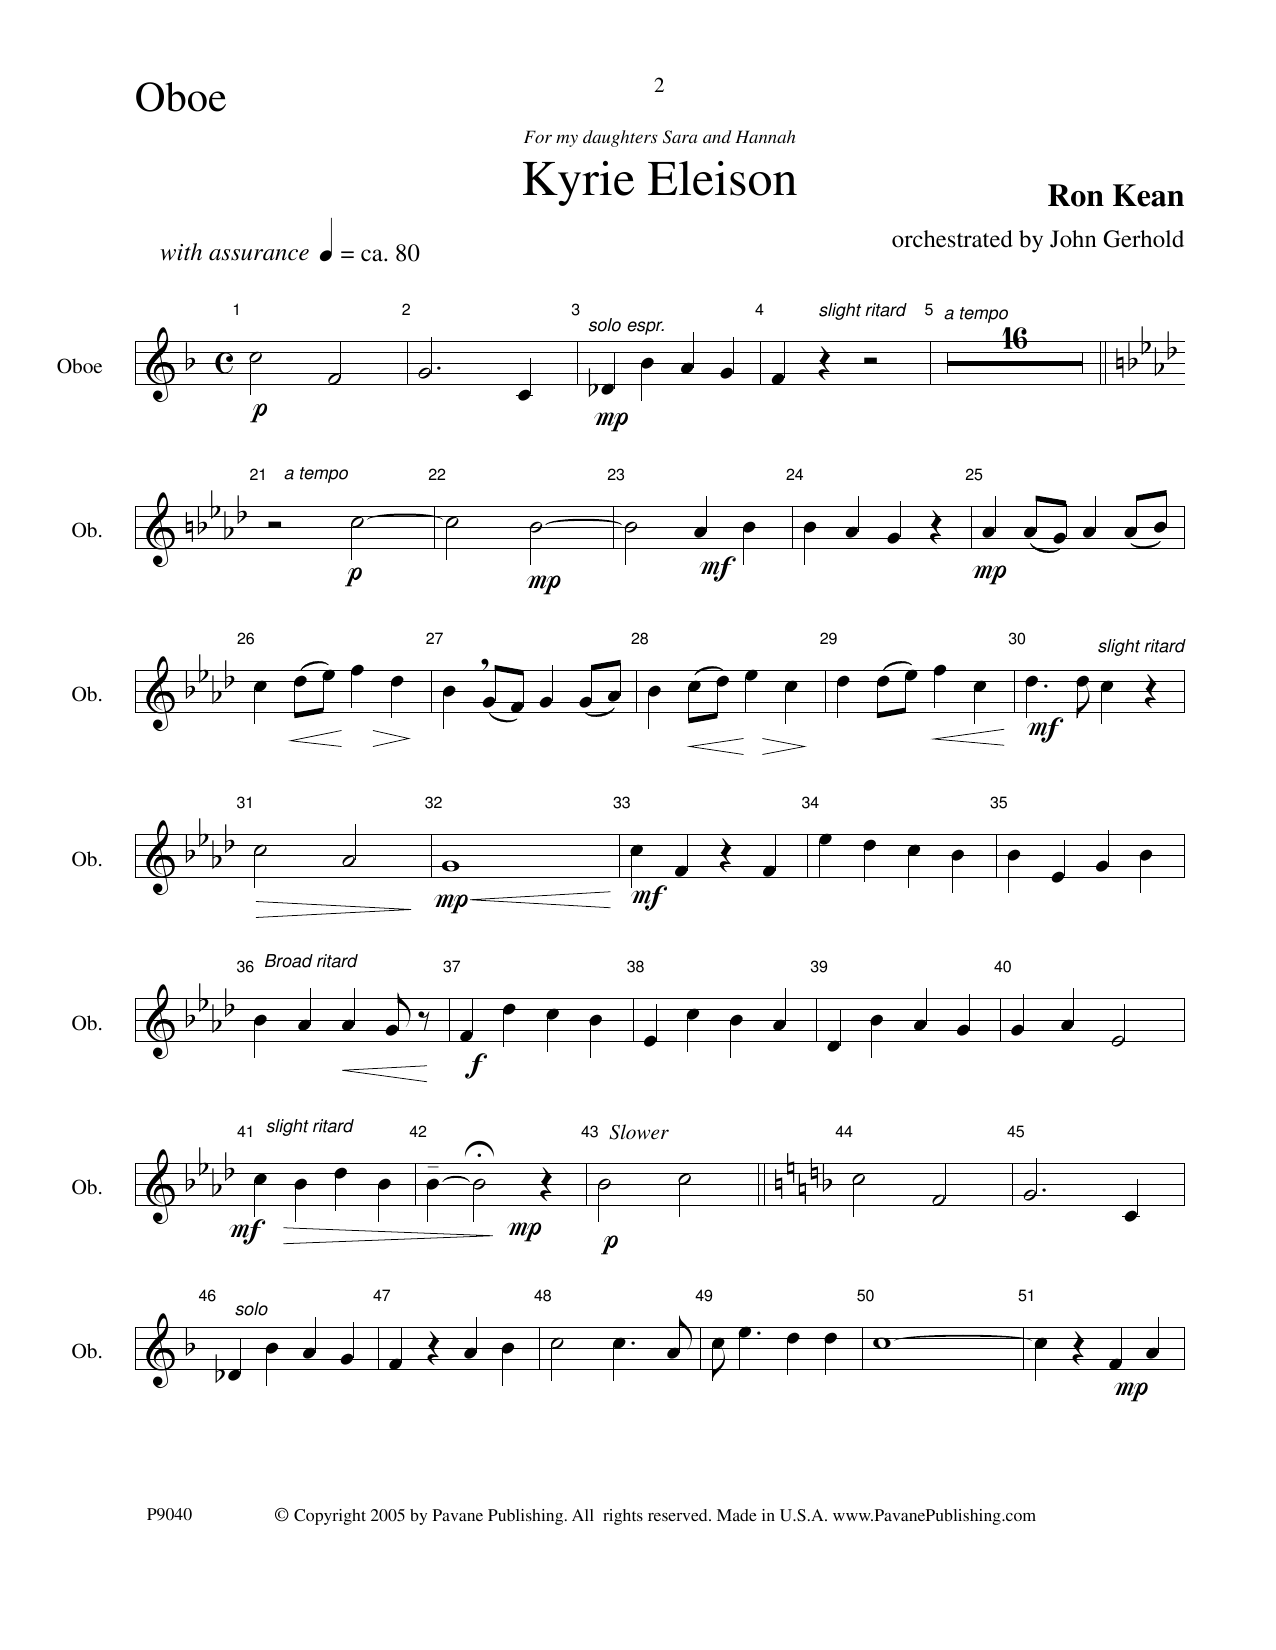 Download Ron Kean American Mass (Chamber Orchestra) (arr. Sheet Music